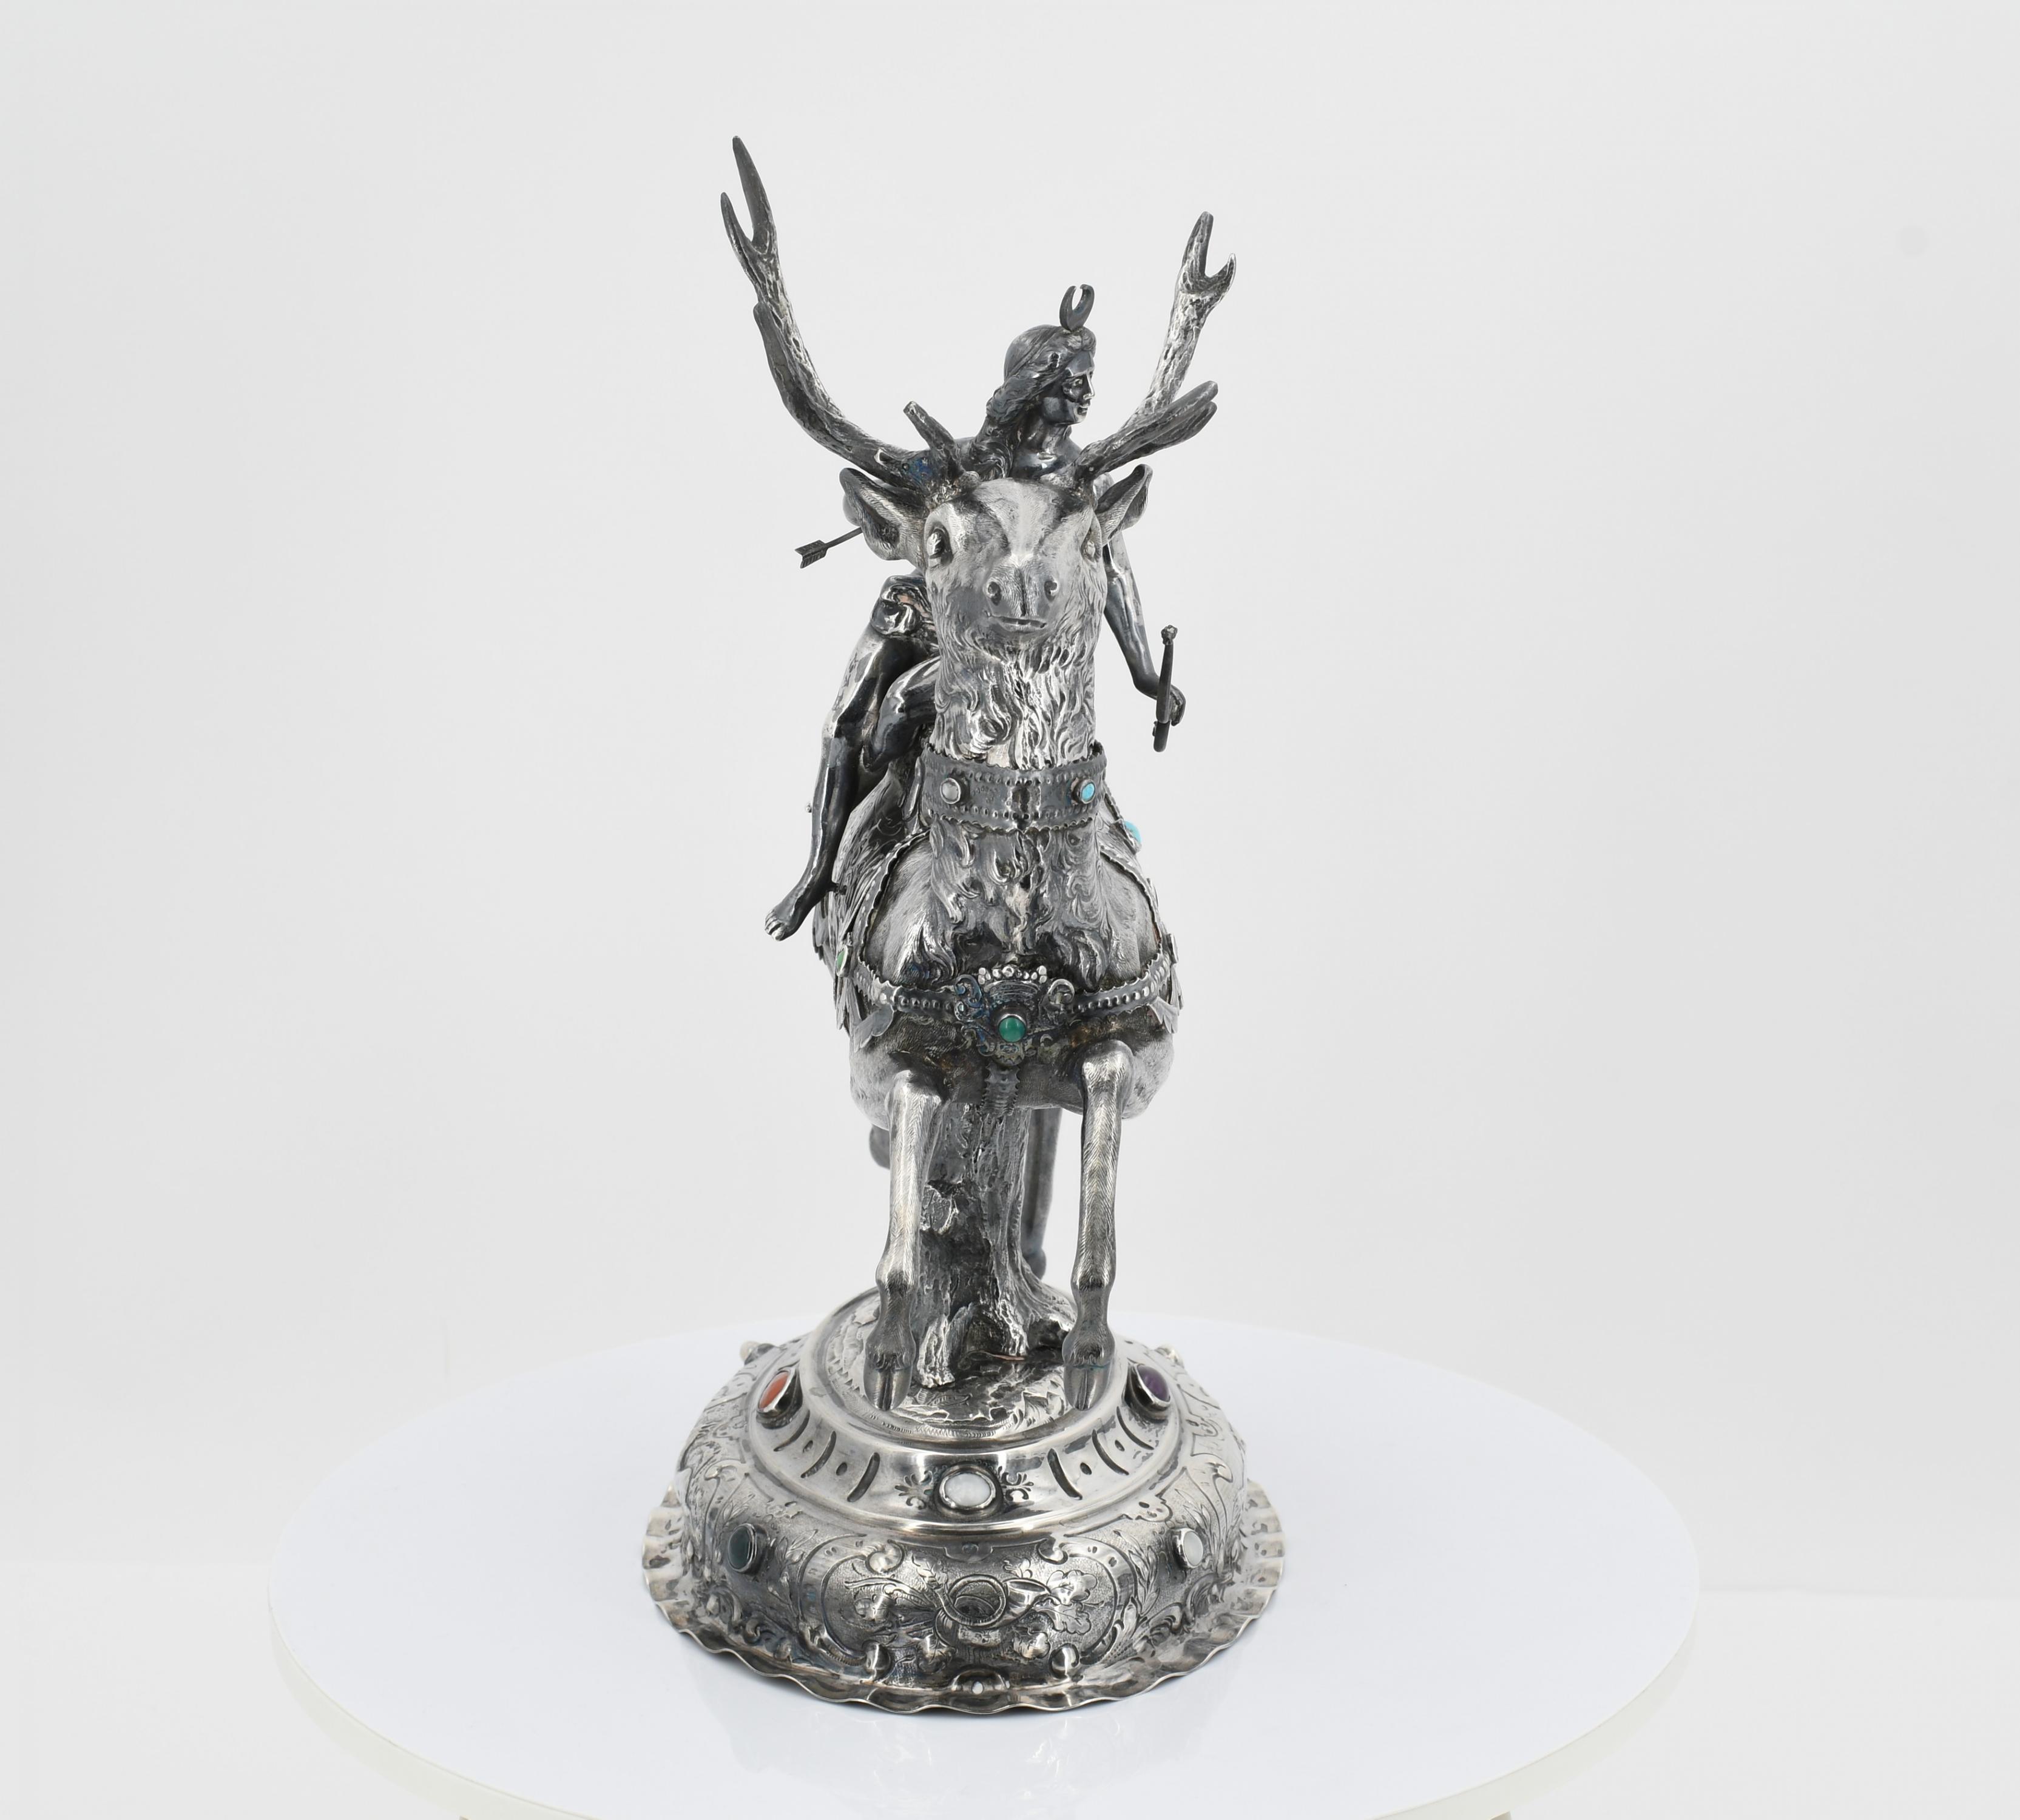 Magnificent Historicism Centerpiece with Diana on Stag - Image 5 of 6